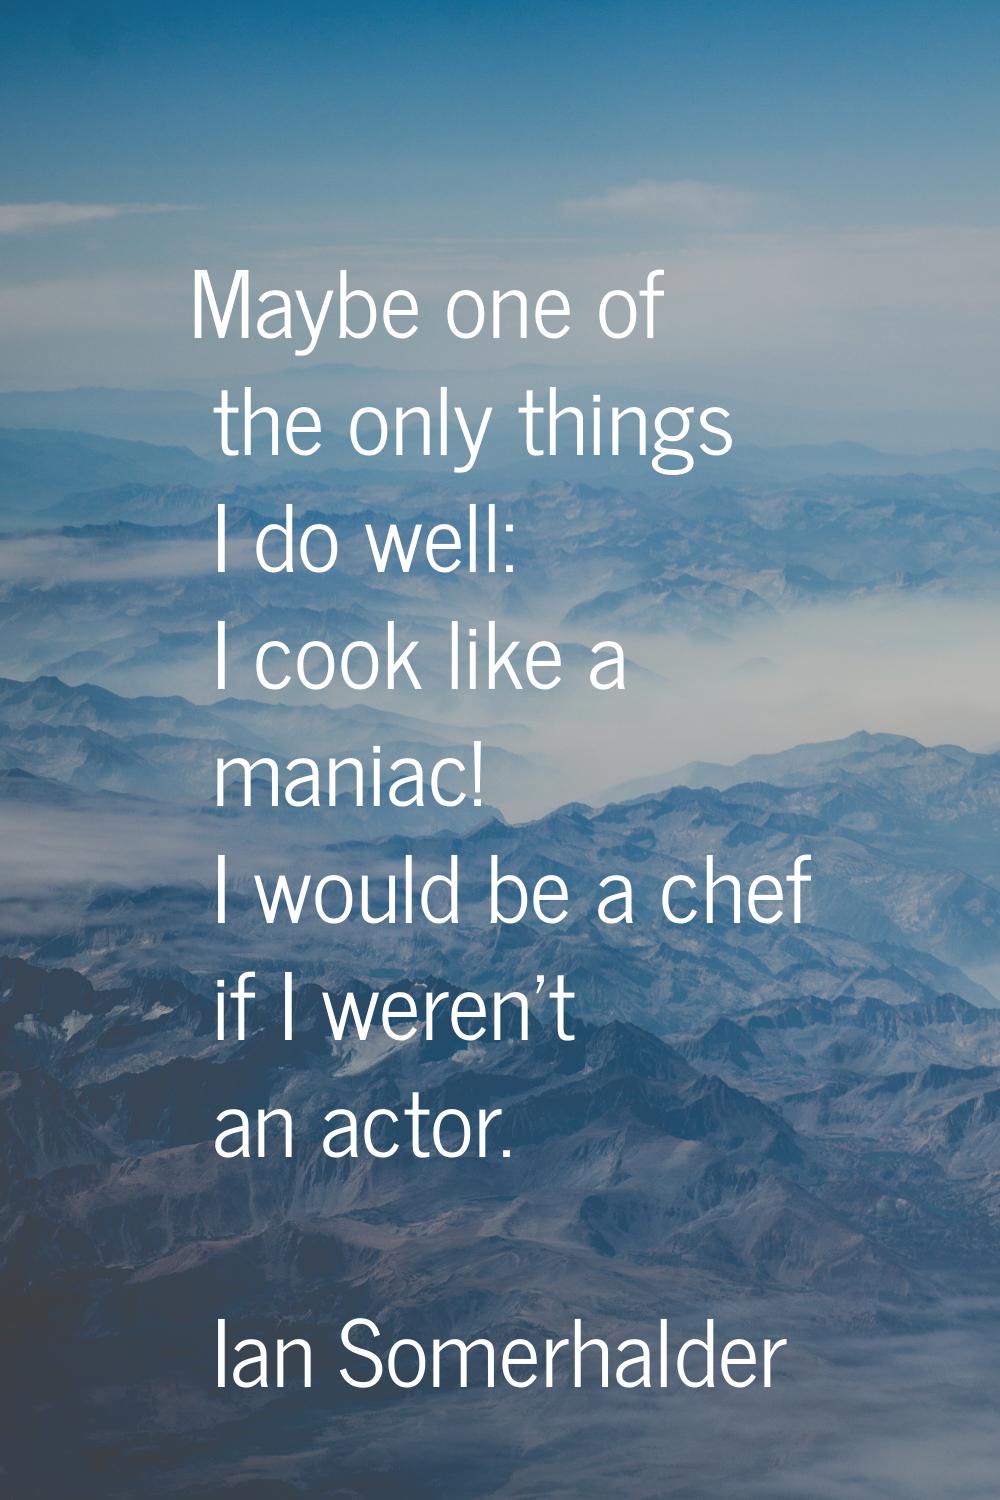 Maybe one of the only things I do well: I cook like a maniac! I would be a chef if I weren't an act